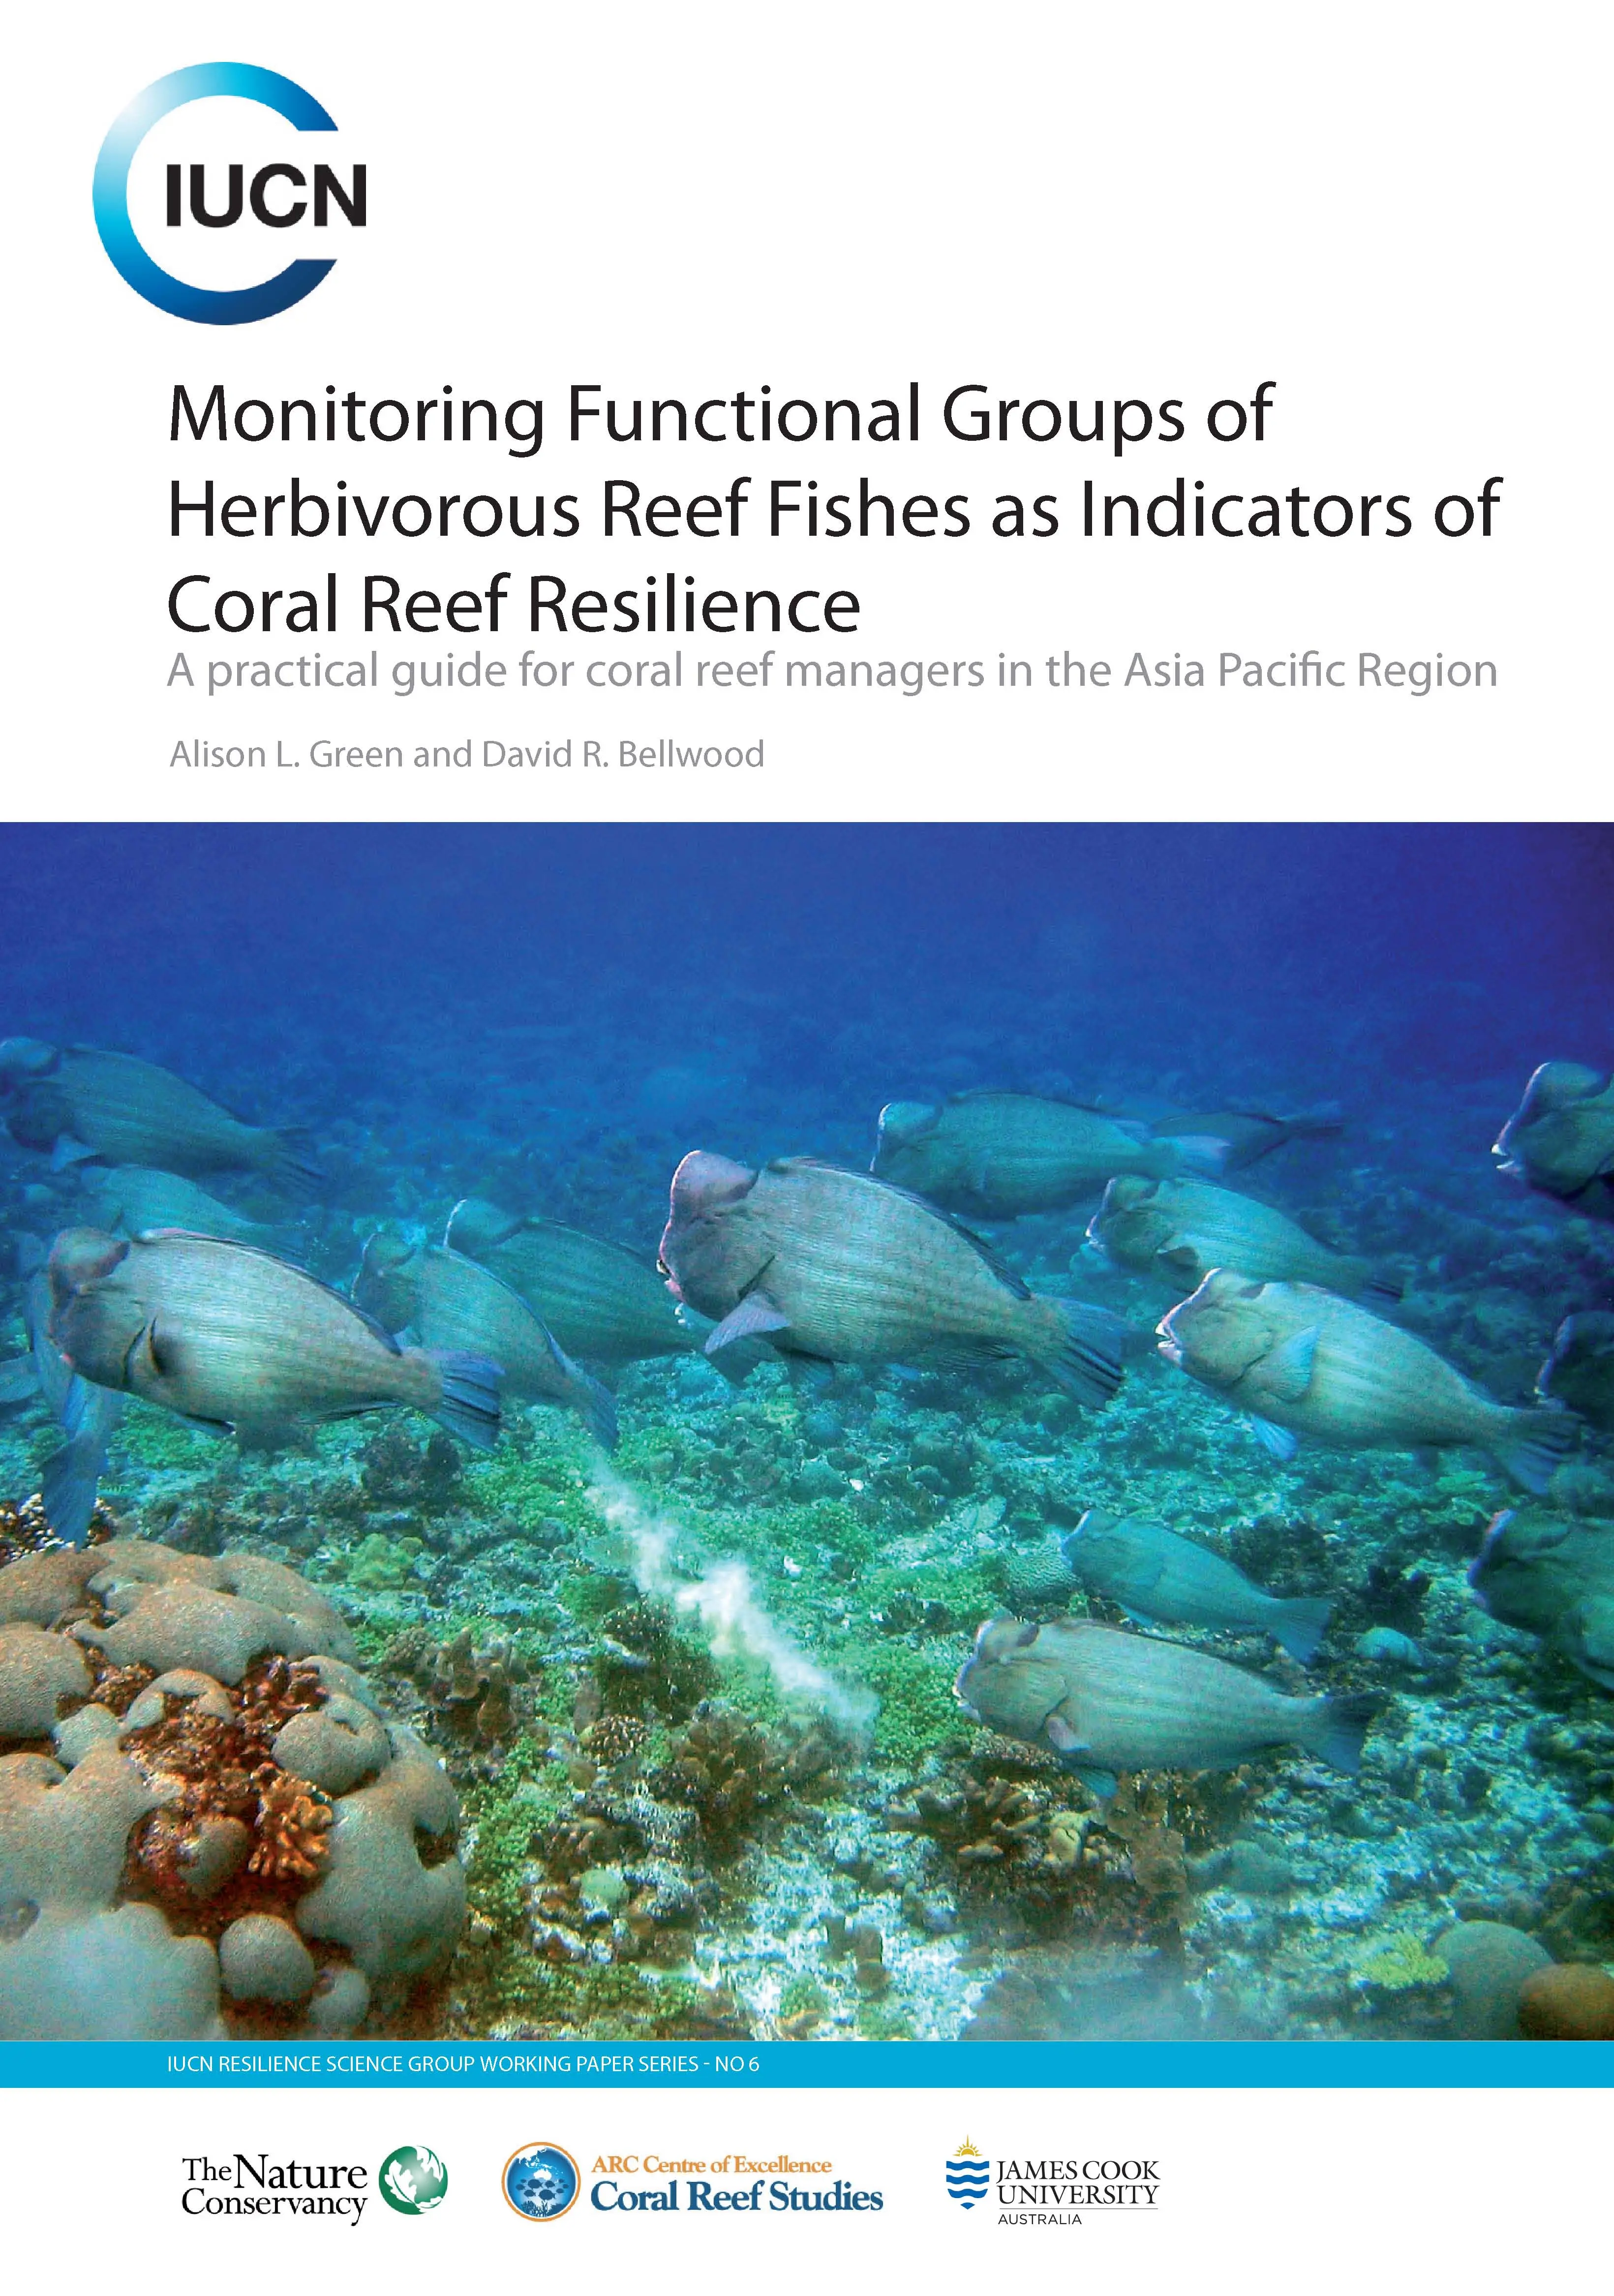 Monitoring Functional Groups of Herbivorous Reef Fishes as Indicators of Coral Reef Resilience - A practical guide for coral reef managers in the Asia Pacific Region